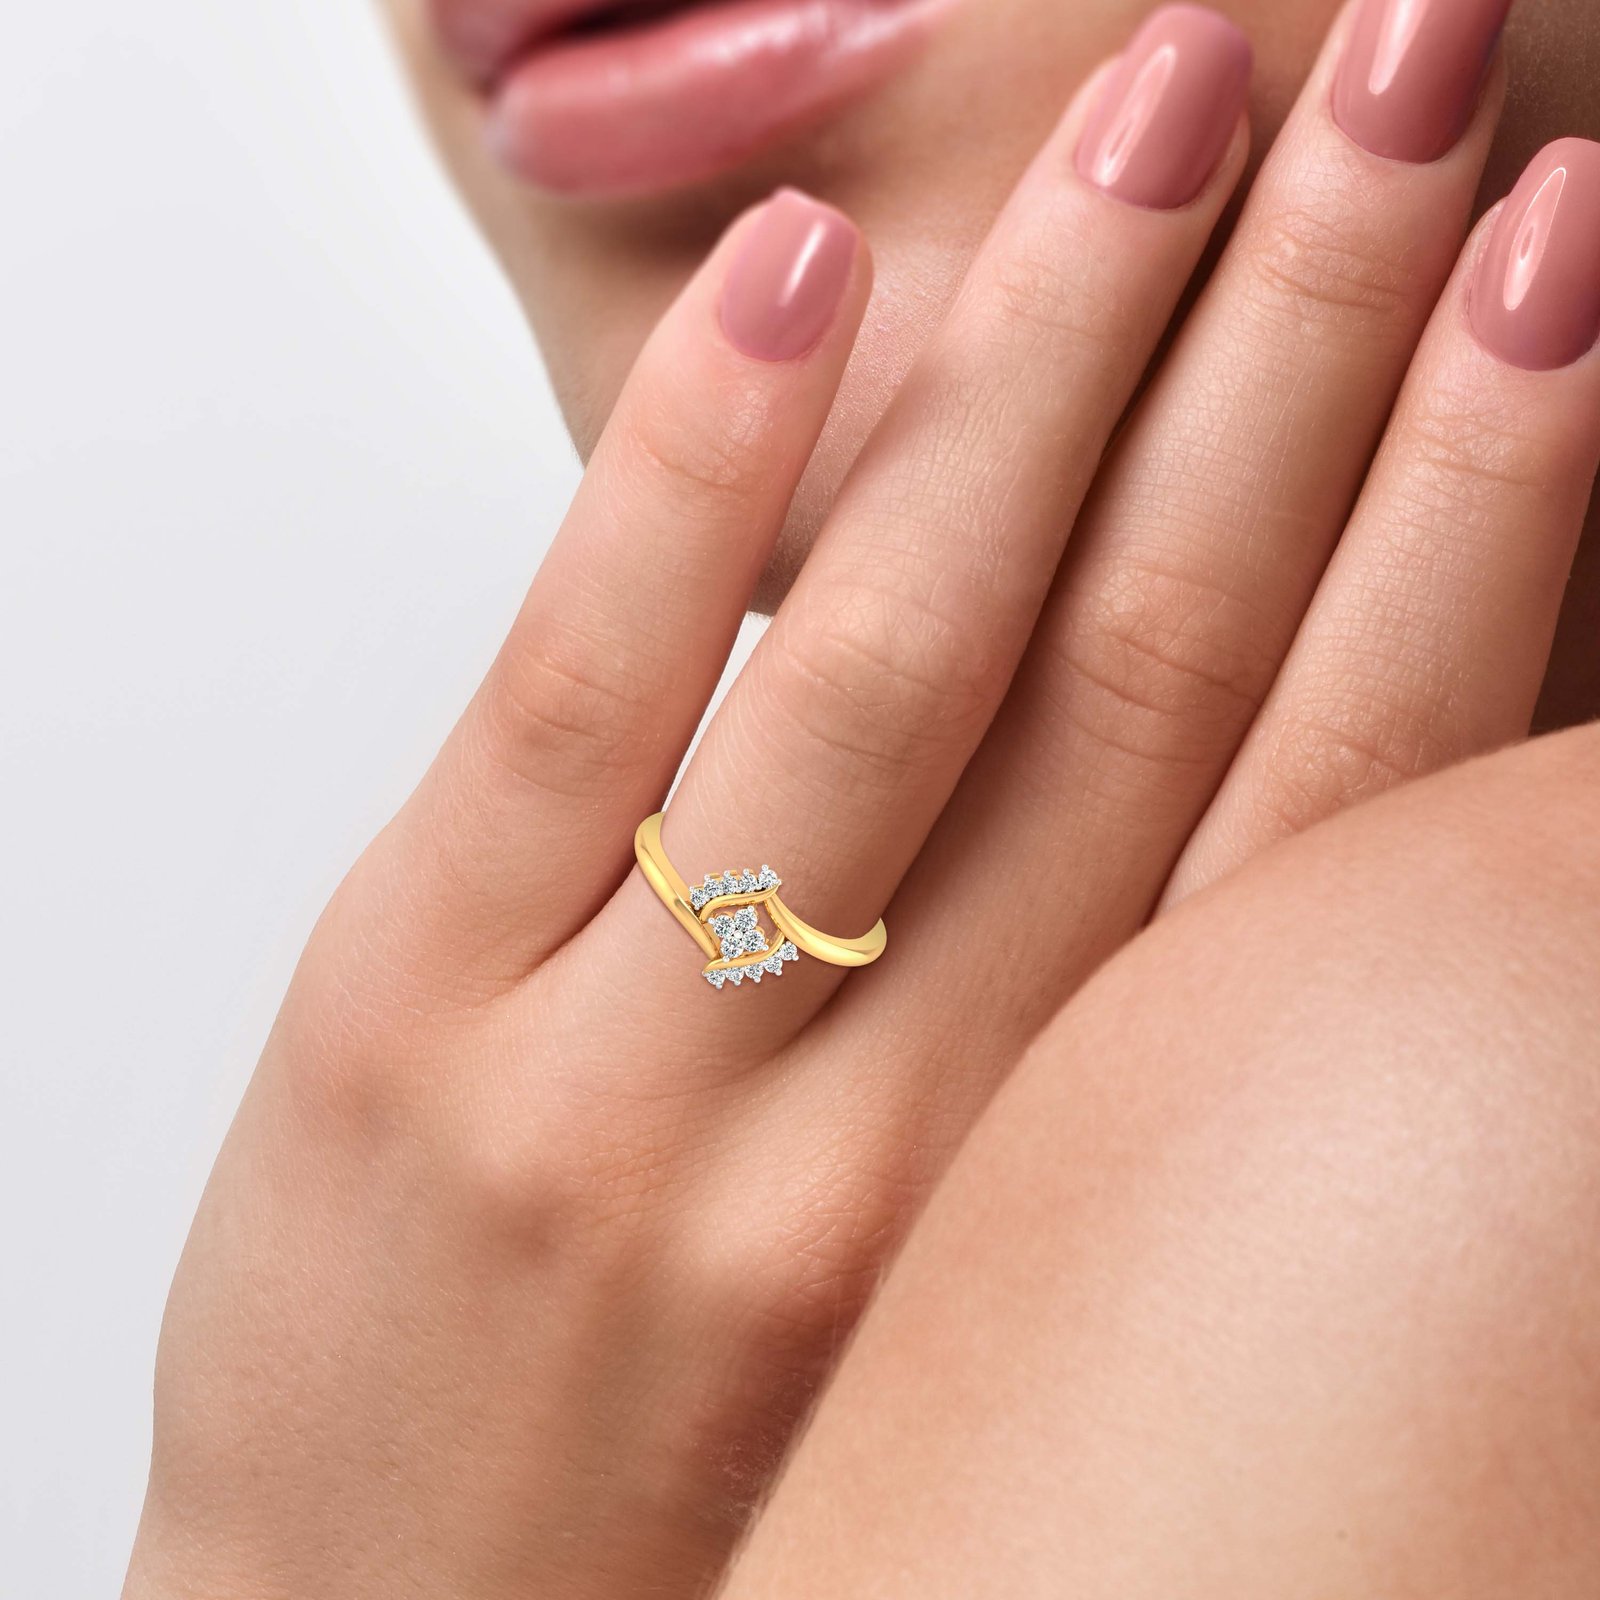 Blush Of Beauty Diamond Ring In Pure Gold By Dhanji Jewels